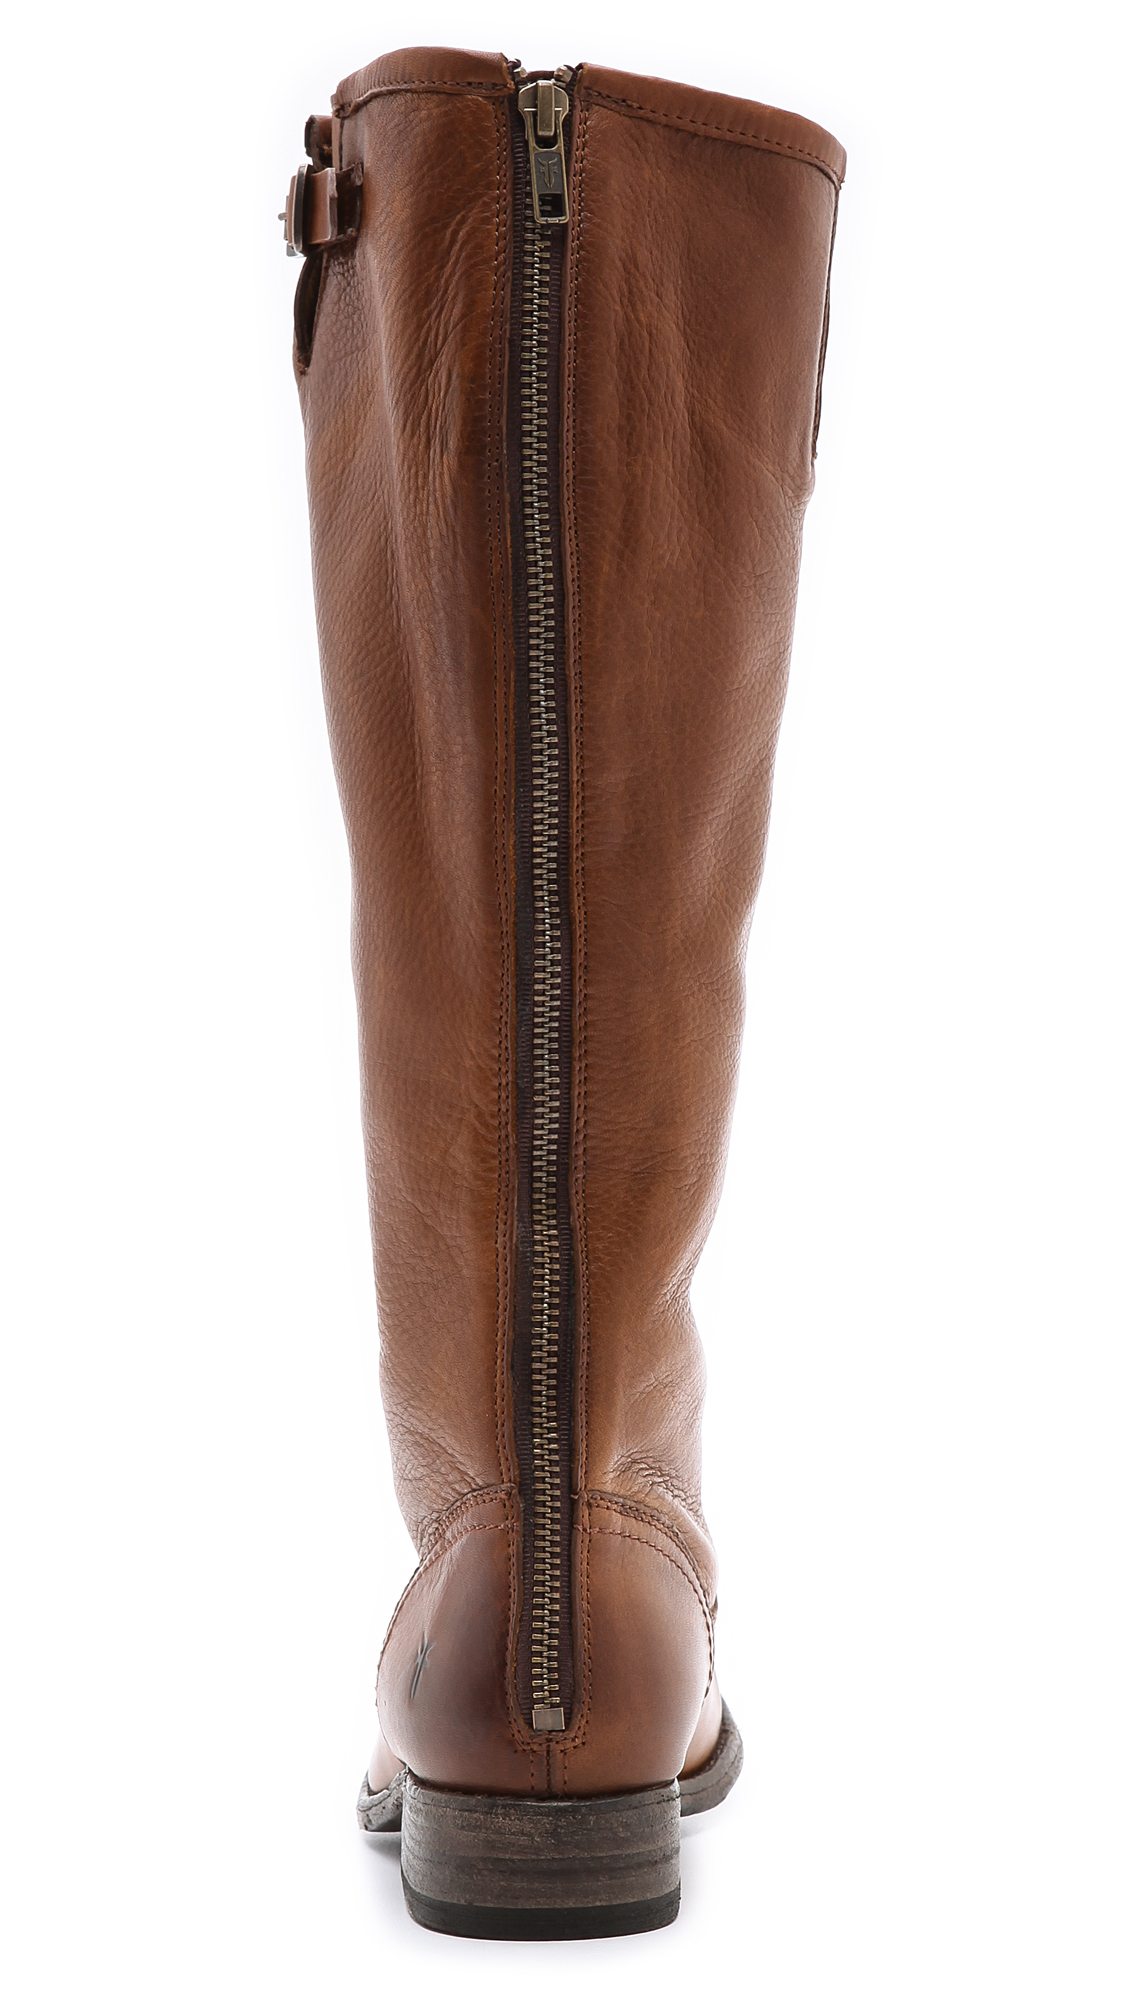 Frye Pippa Back Zip Tall Boots in 